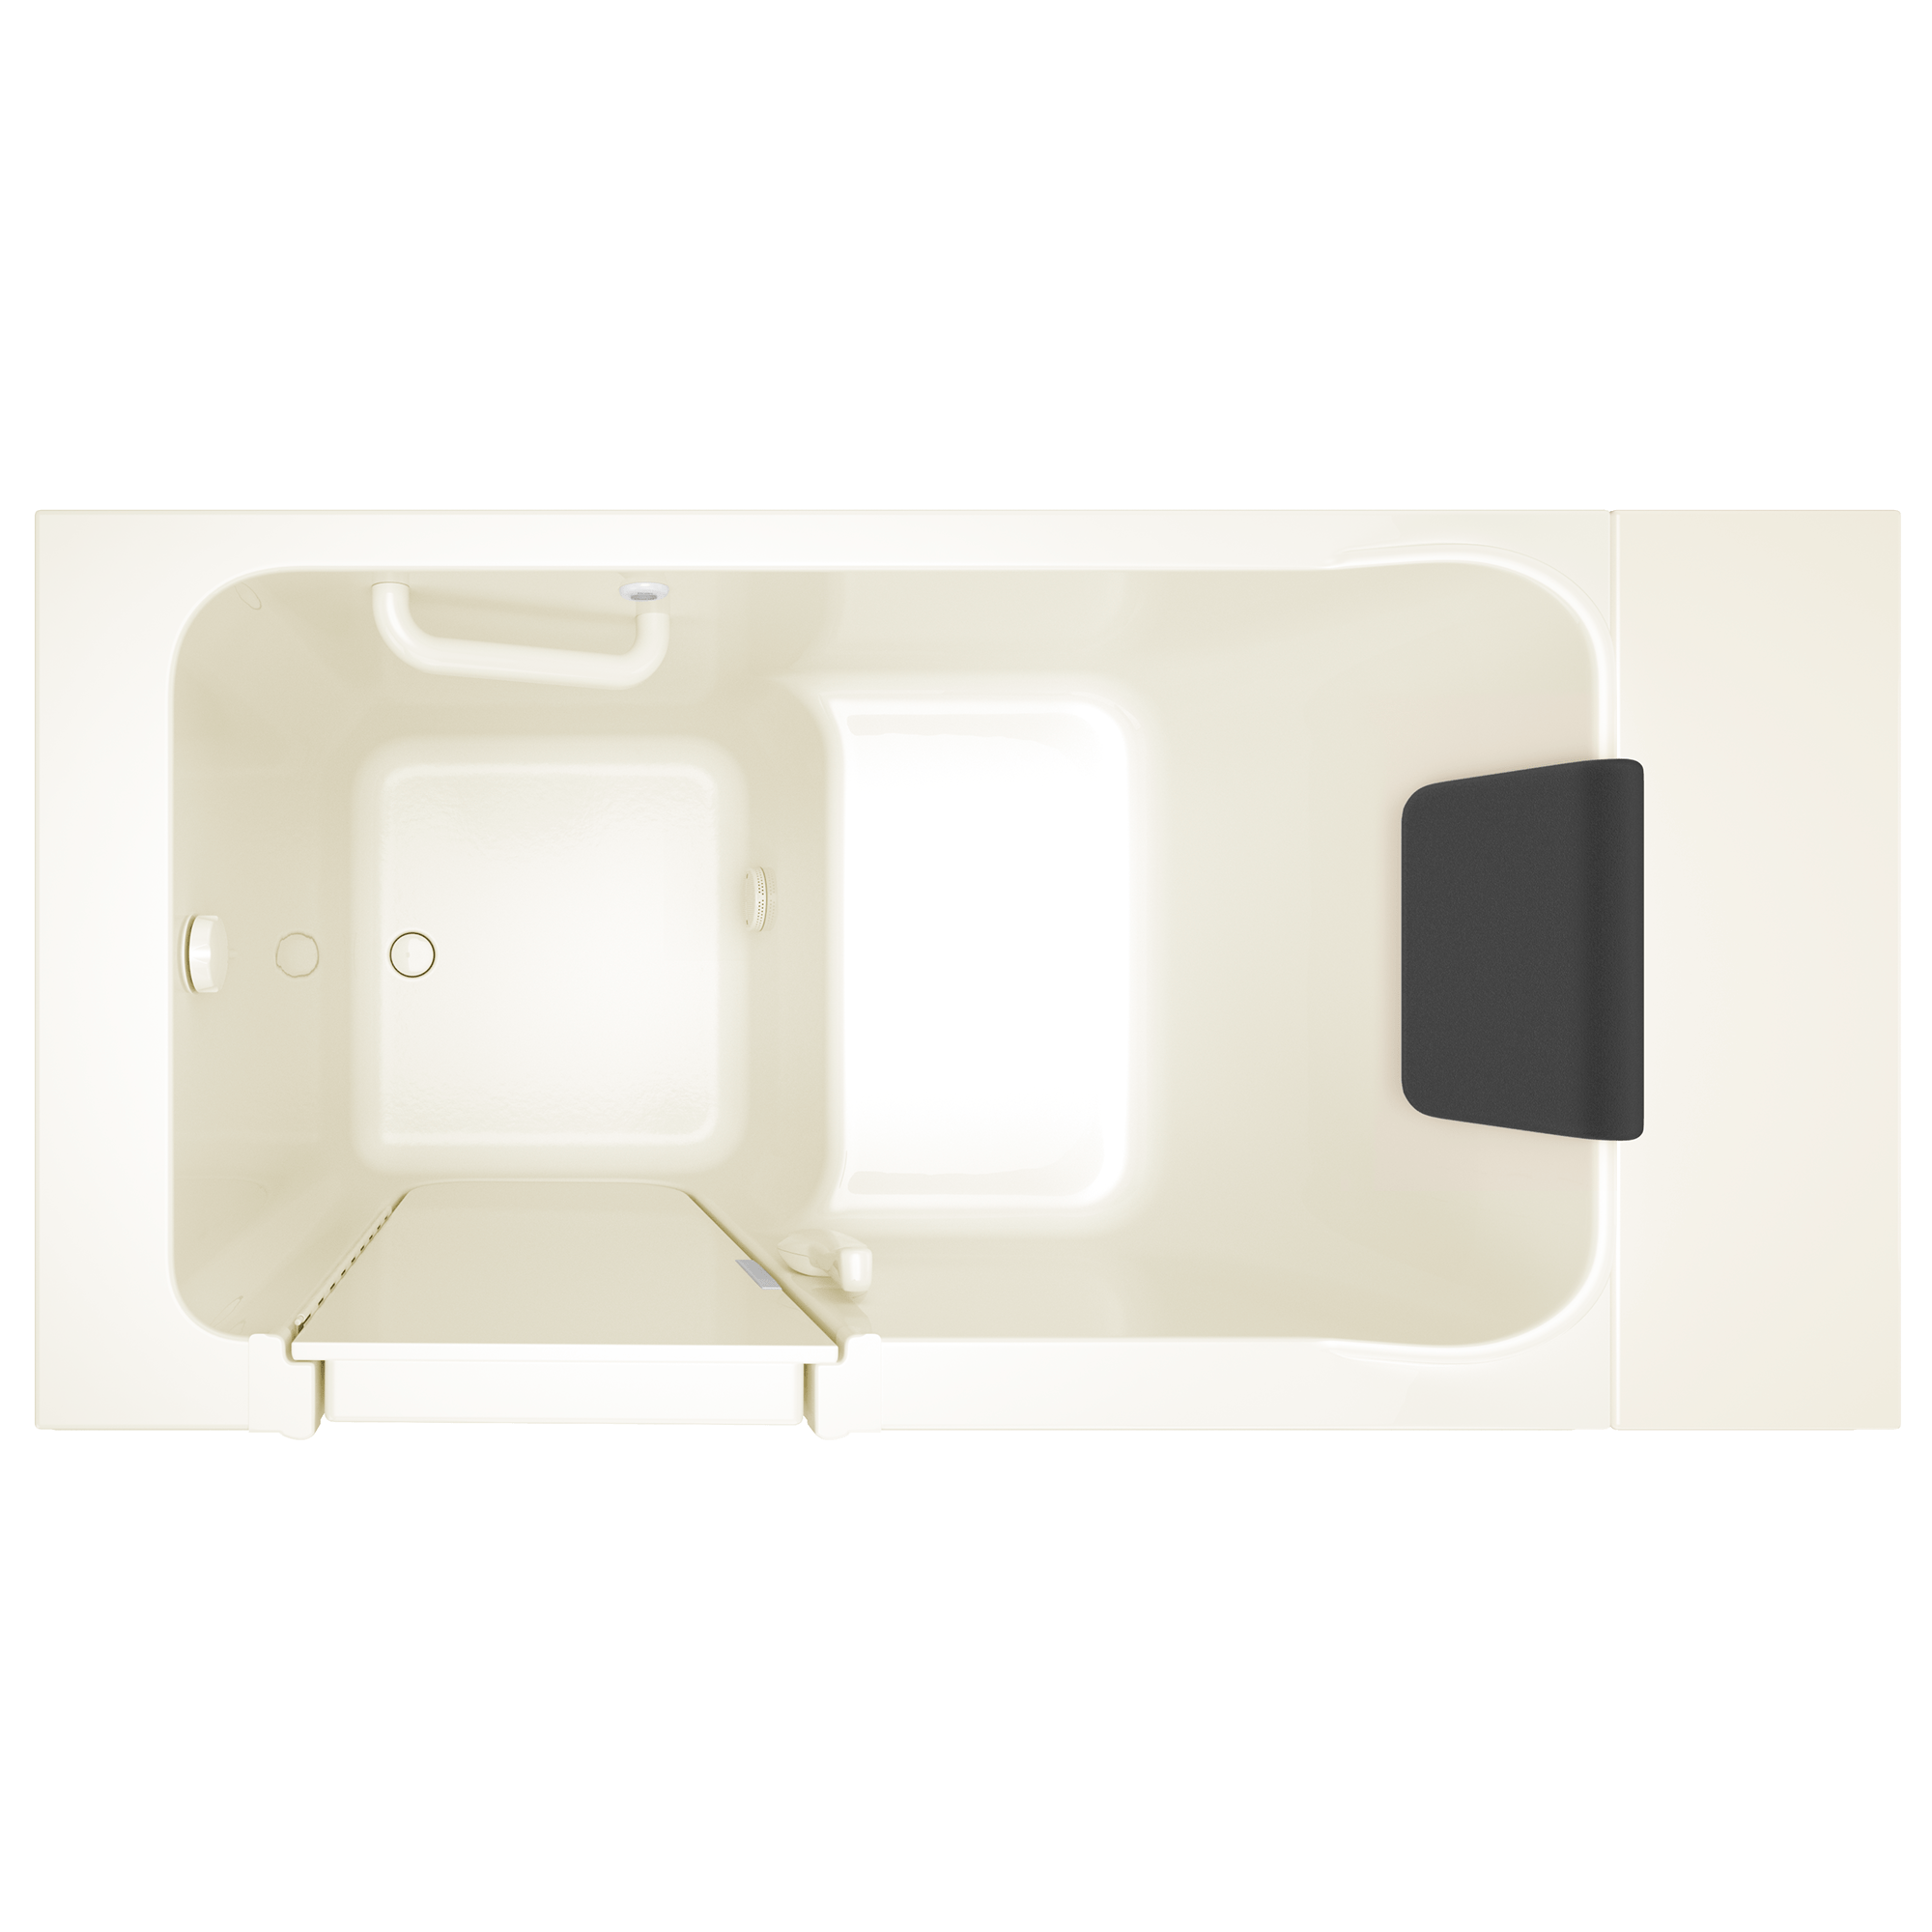 Acrylic Luxury Series 30 x 51 -Inch Walk-in Tub With Soaker System - Left-Hand Drain